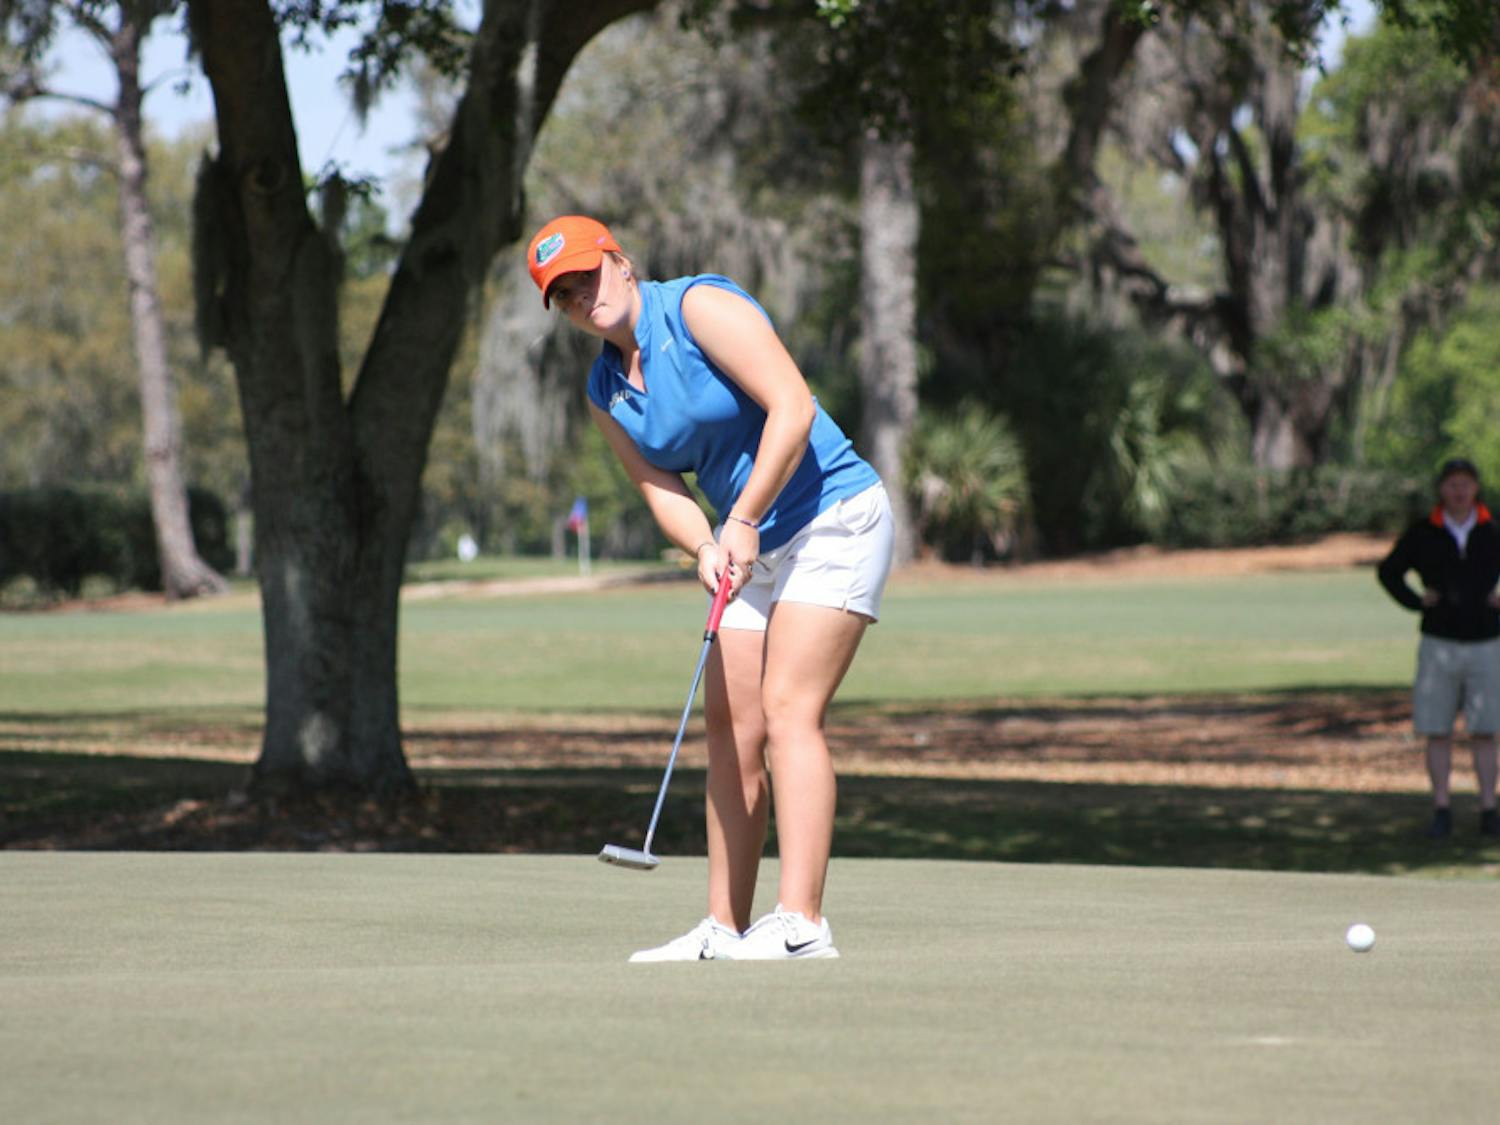 Junior Marta Perez (+1) is in eighth after two rounds at the Longhorn Invite.  UF (+10) is currently in 10th. 